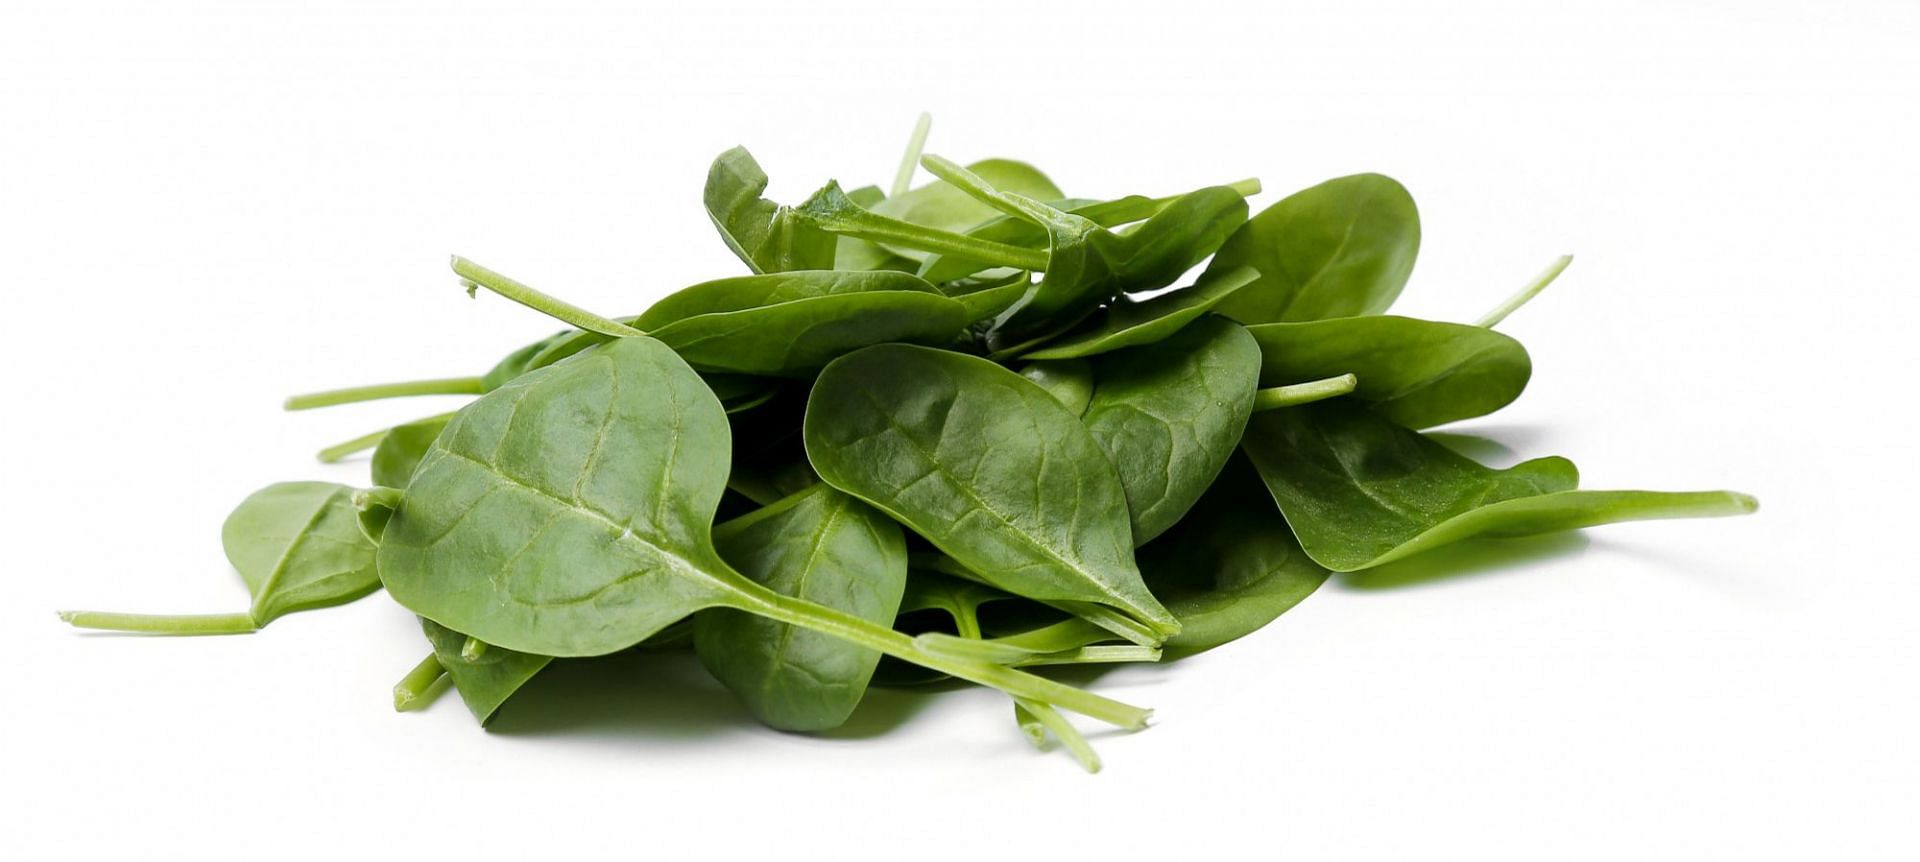 Spinach as food for breakfast (Image by Racool_studio on Freepik)